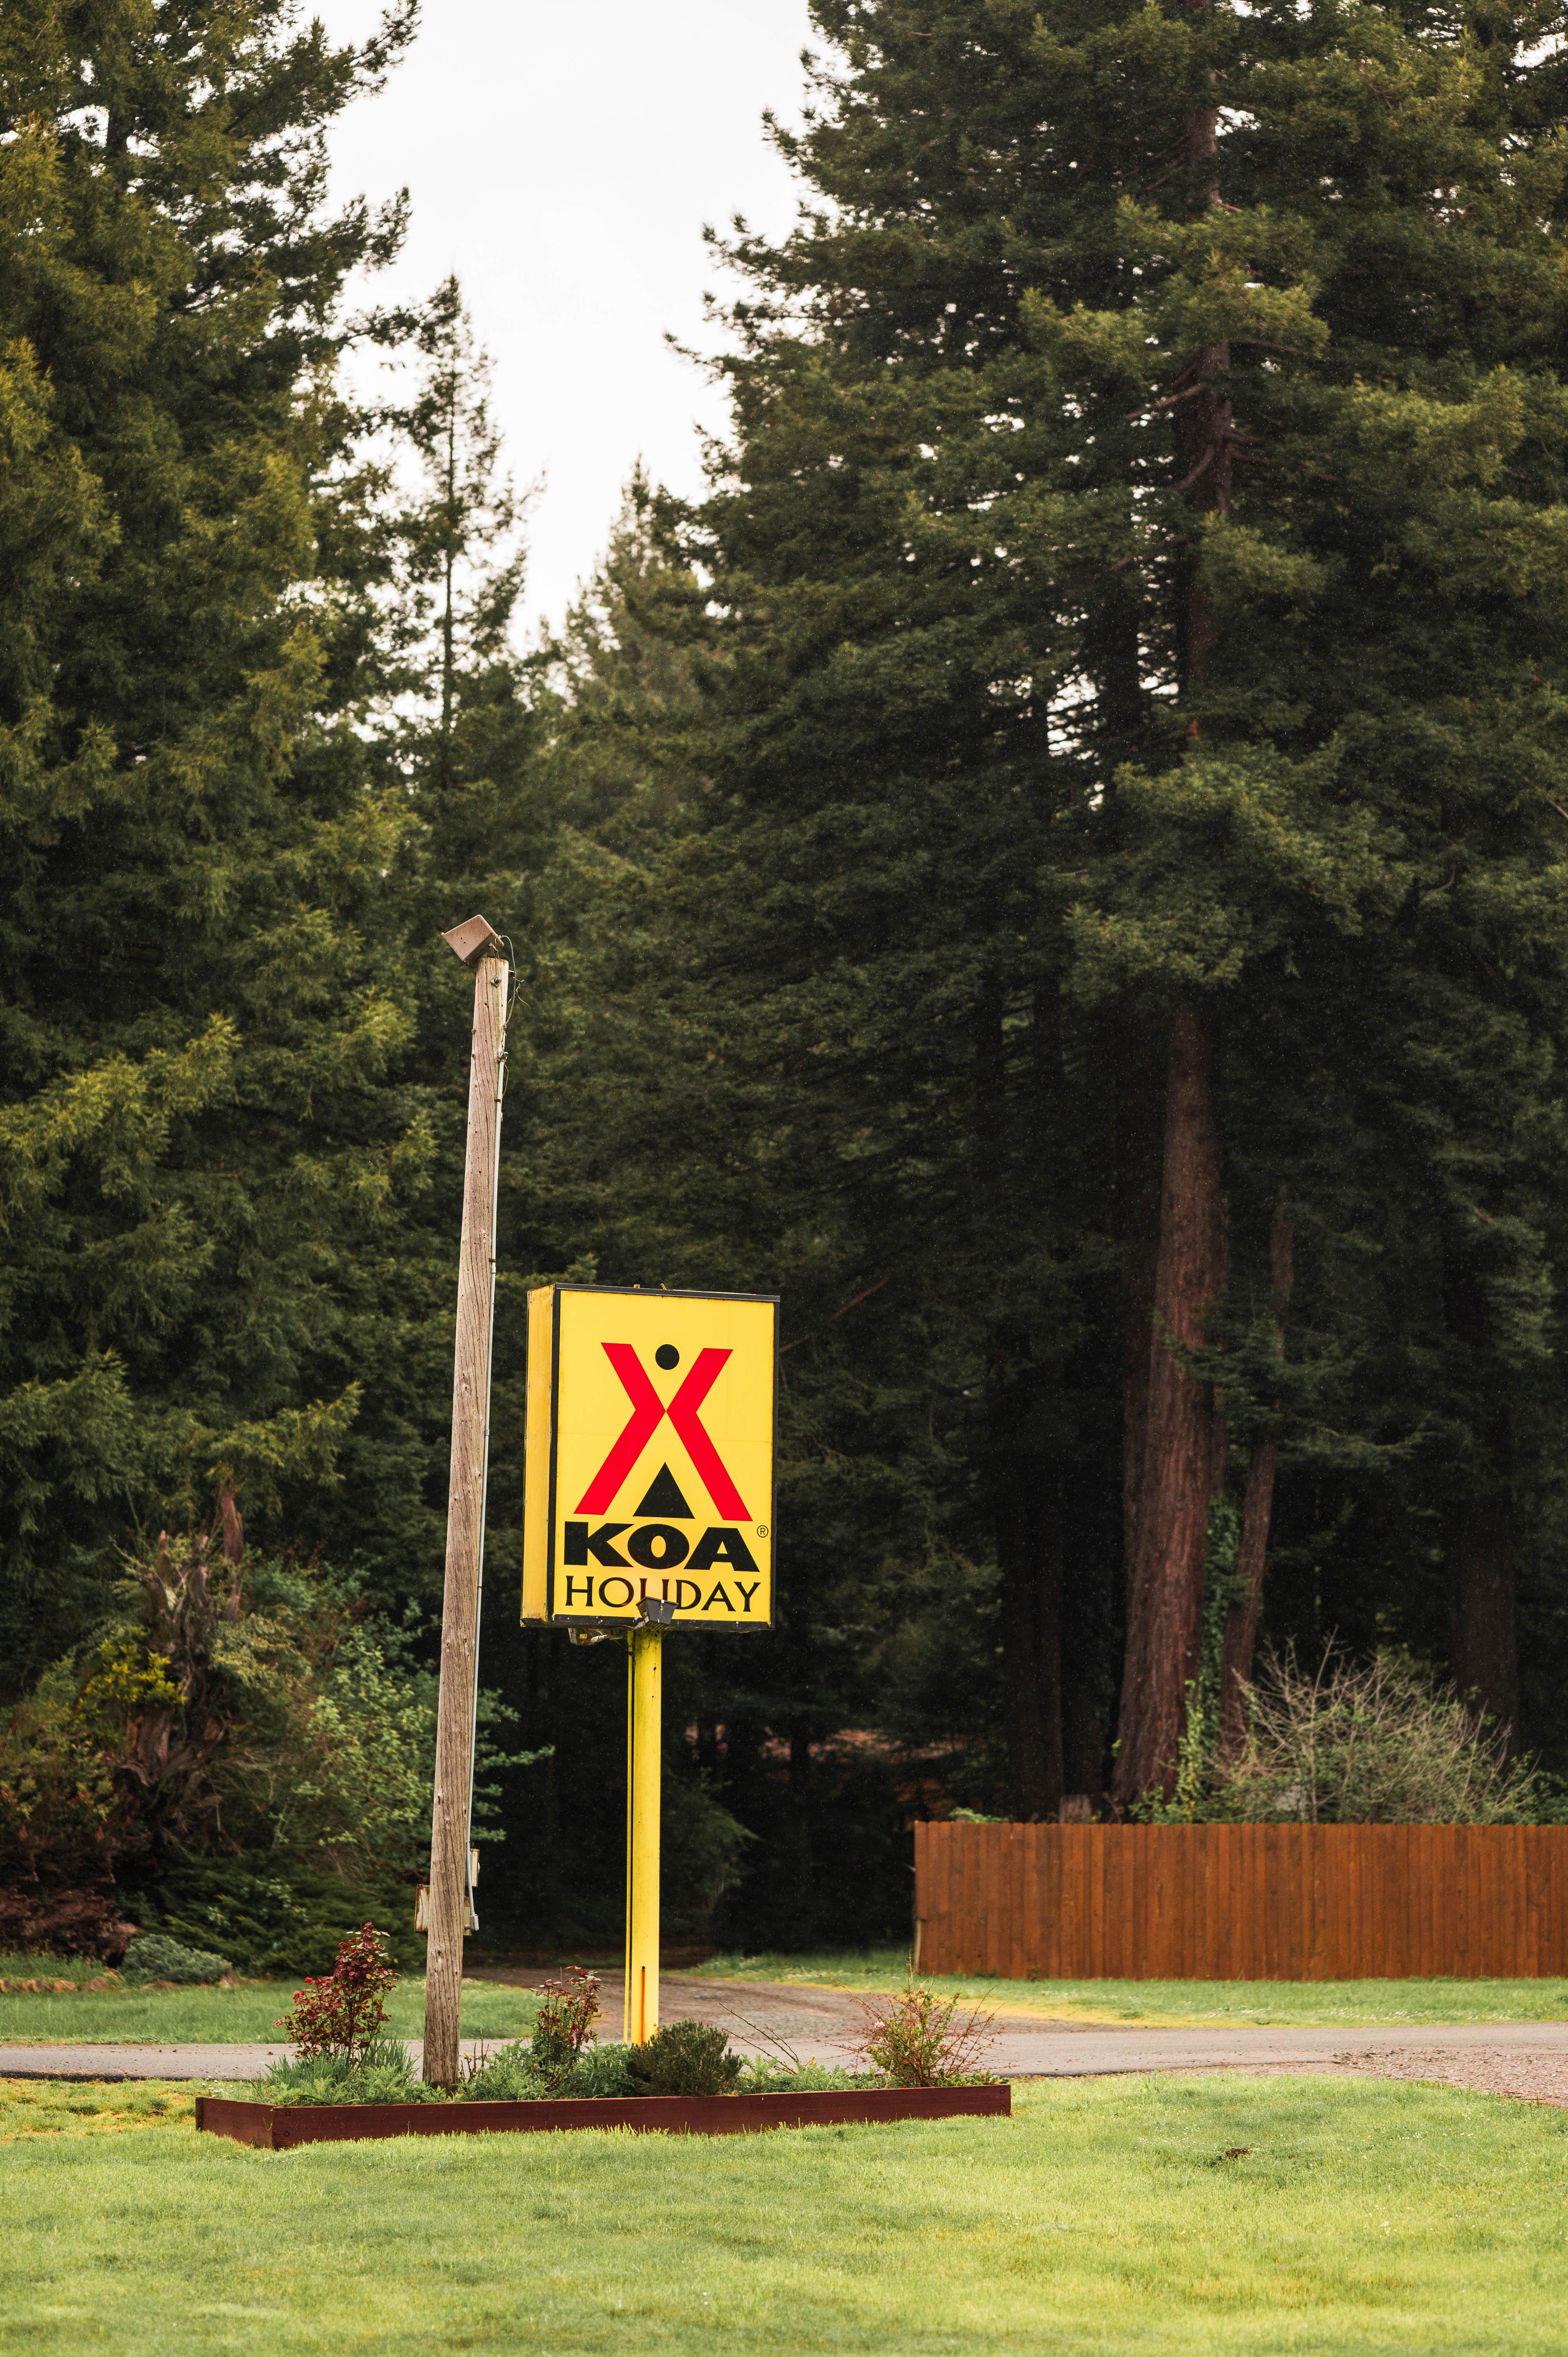 Camper submitted image from Crescent City/Redwoods KOA - 1